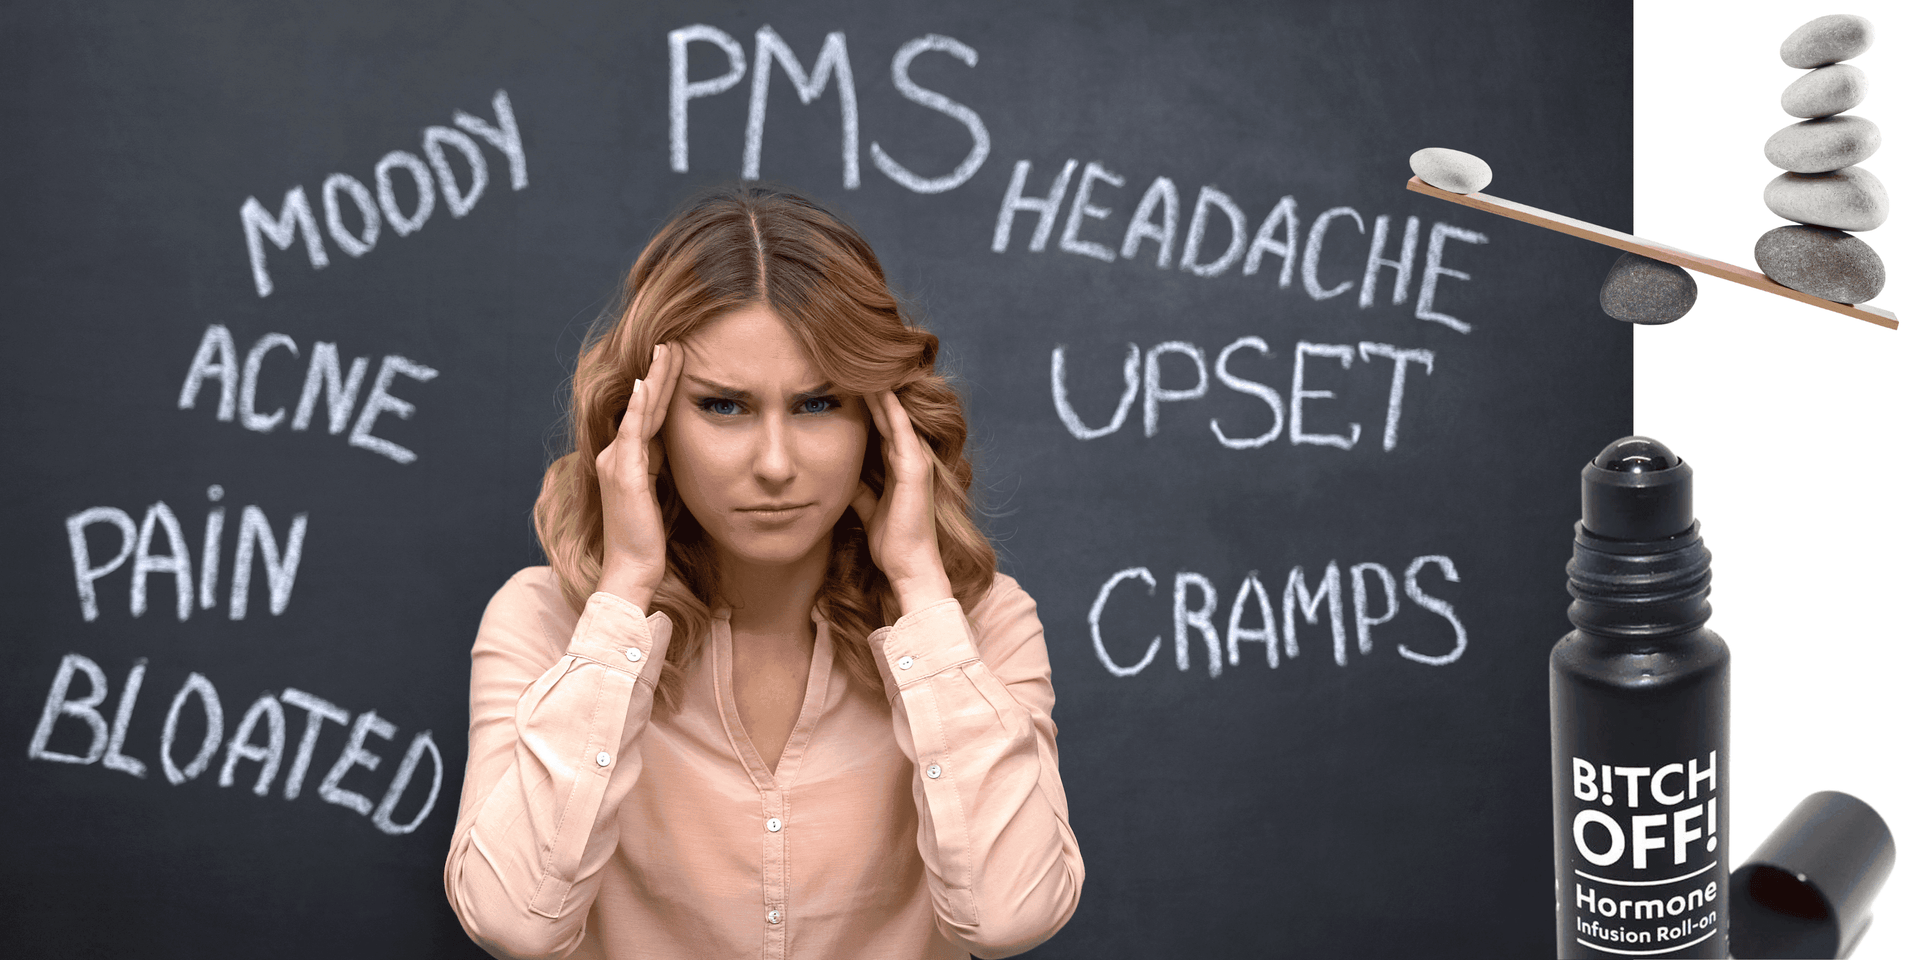 Hormonal imbalances, including PCOS, what are the signs? - Dr Kez Chirolab 